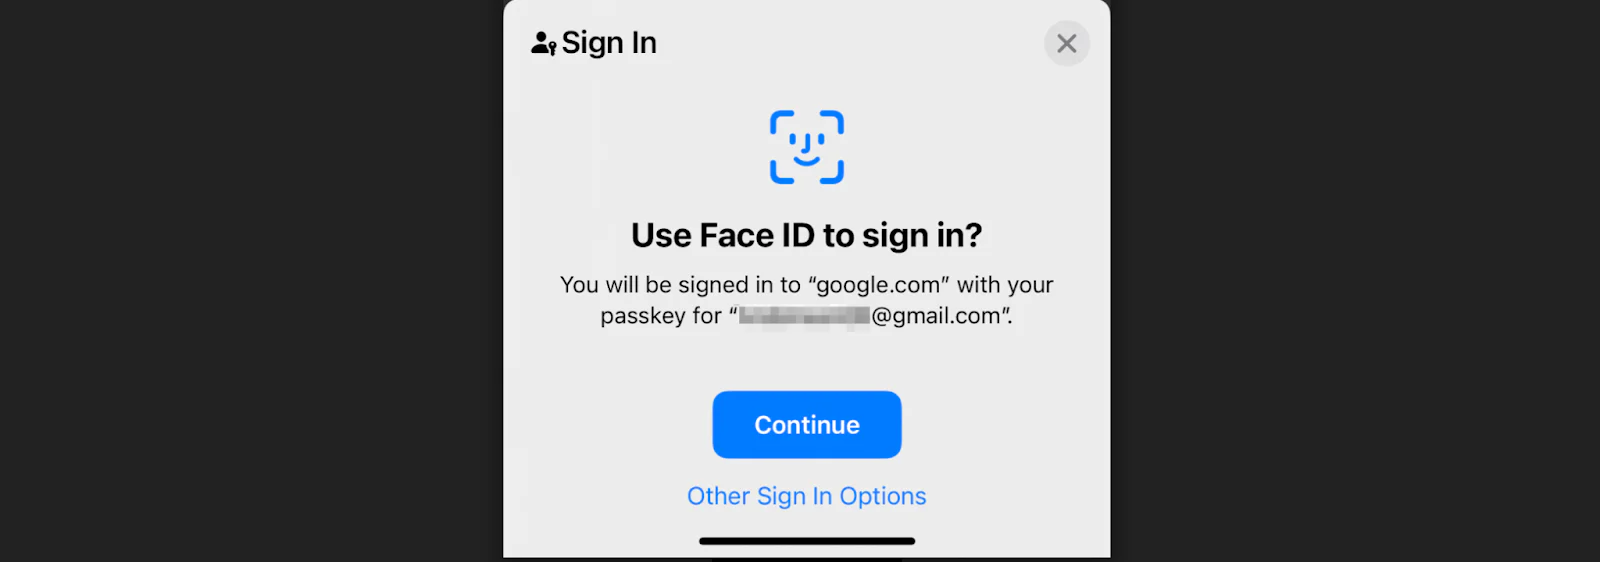 Popular sites like Google use passkeys for customer authentication.